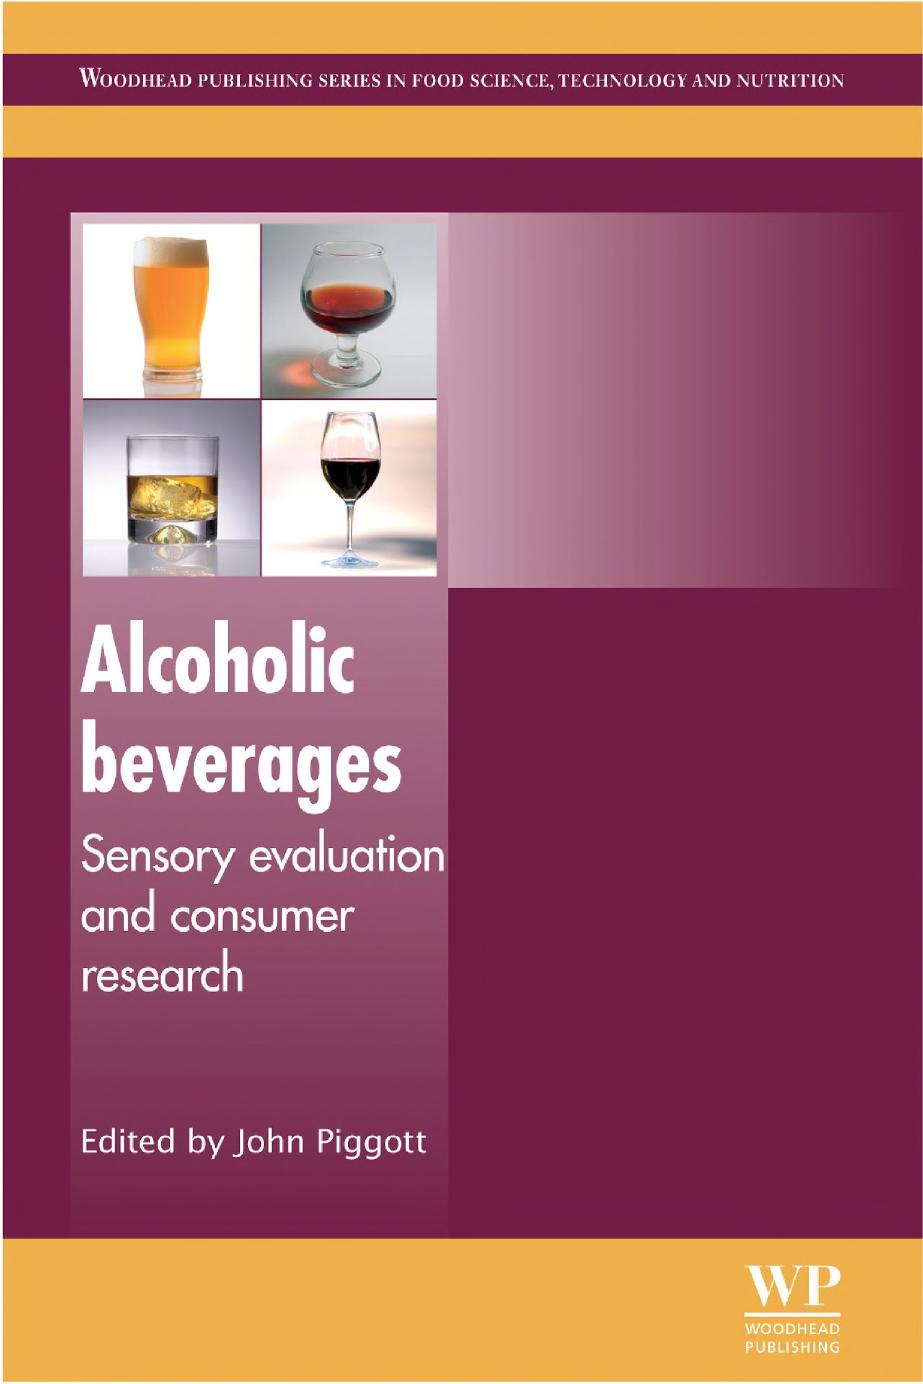 225. Alcoholic Beverages by 4<8=8AB@0B>@